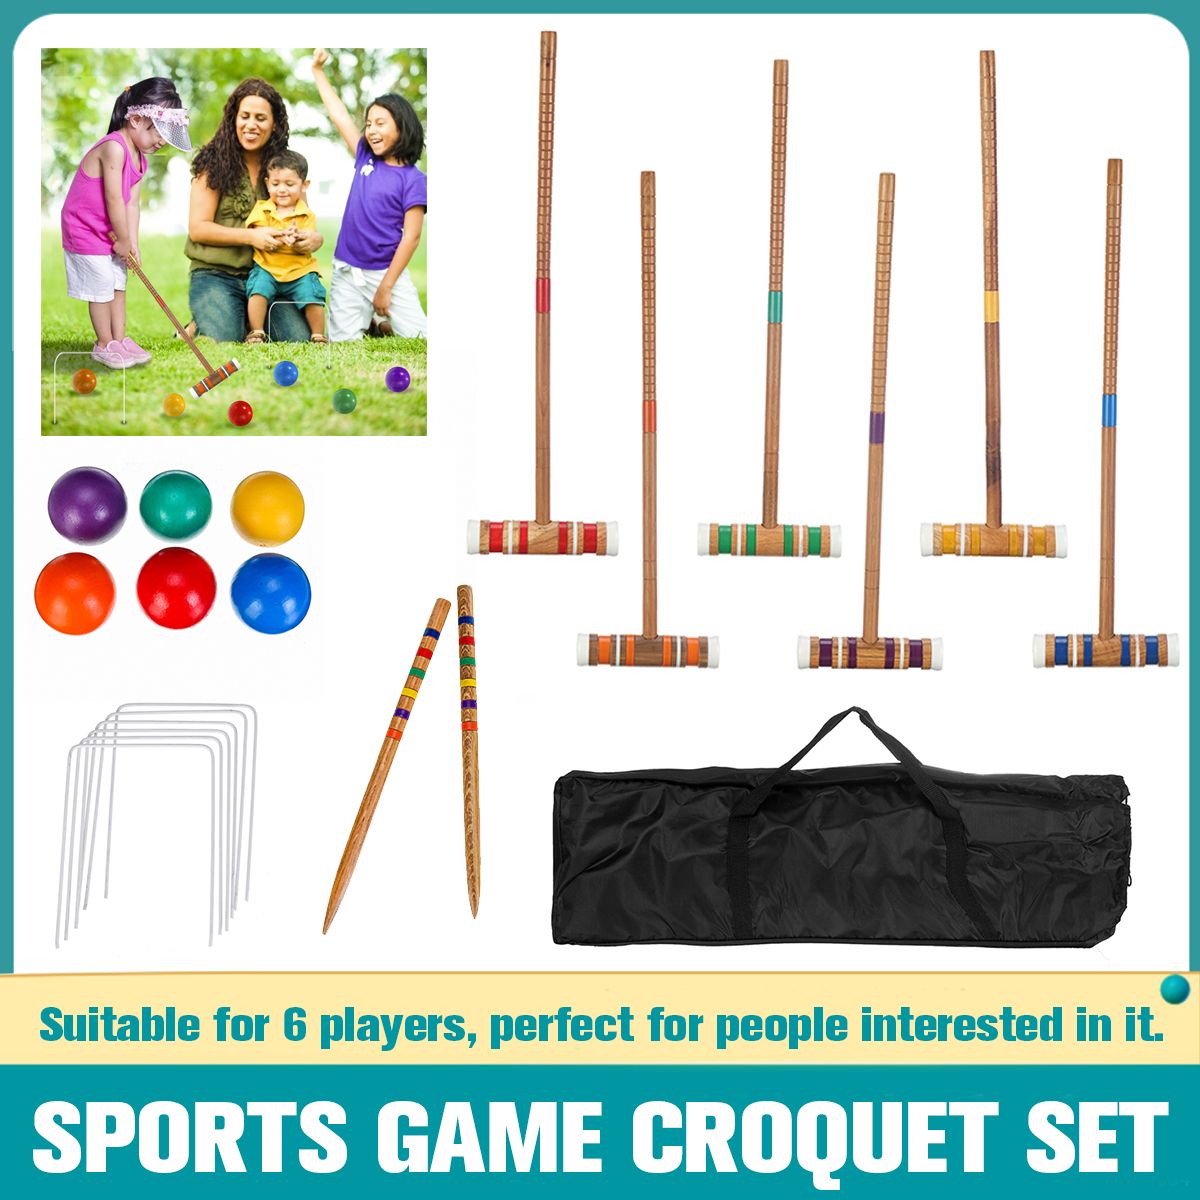 Outdoor-Game-Sport-Gate-Ball-Croguet-Set-for-6-Players-luxury-childrens-Sports-Toy-Croquet-Doorball--1717526